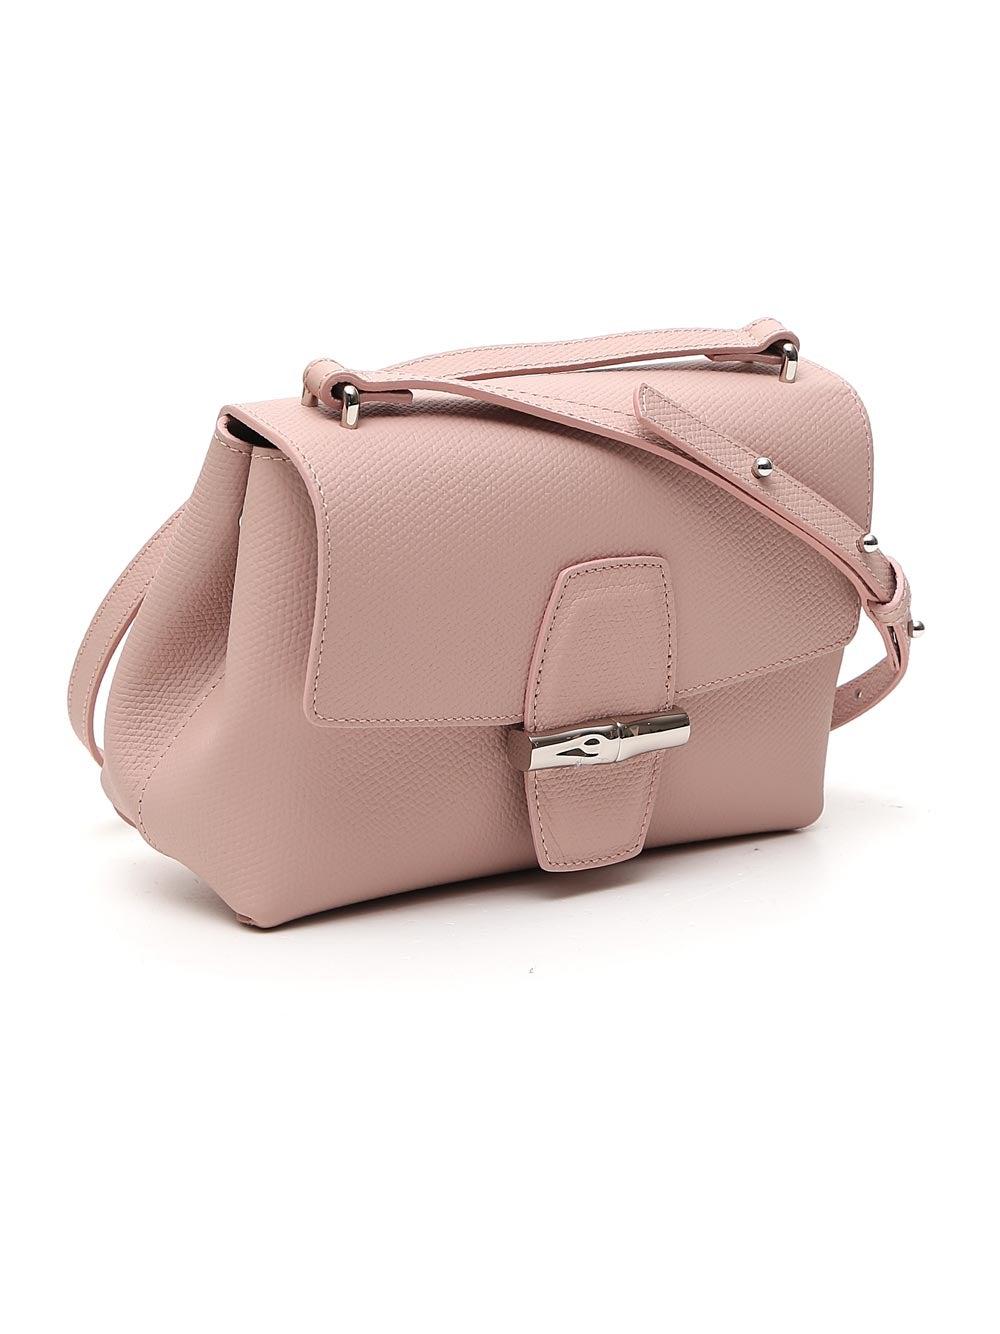 NWT Longchamp Roseau Mini Sml Crossbody Bag PALE PINK 🌸Made in France  AUTHENTIC